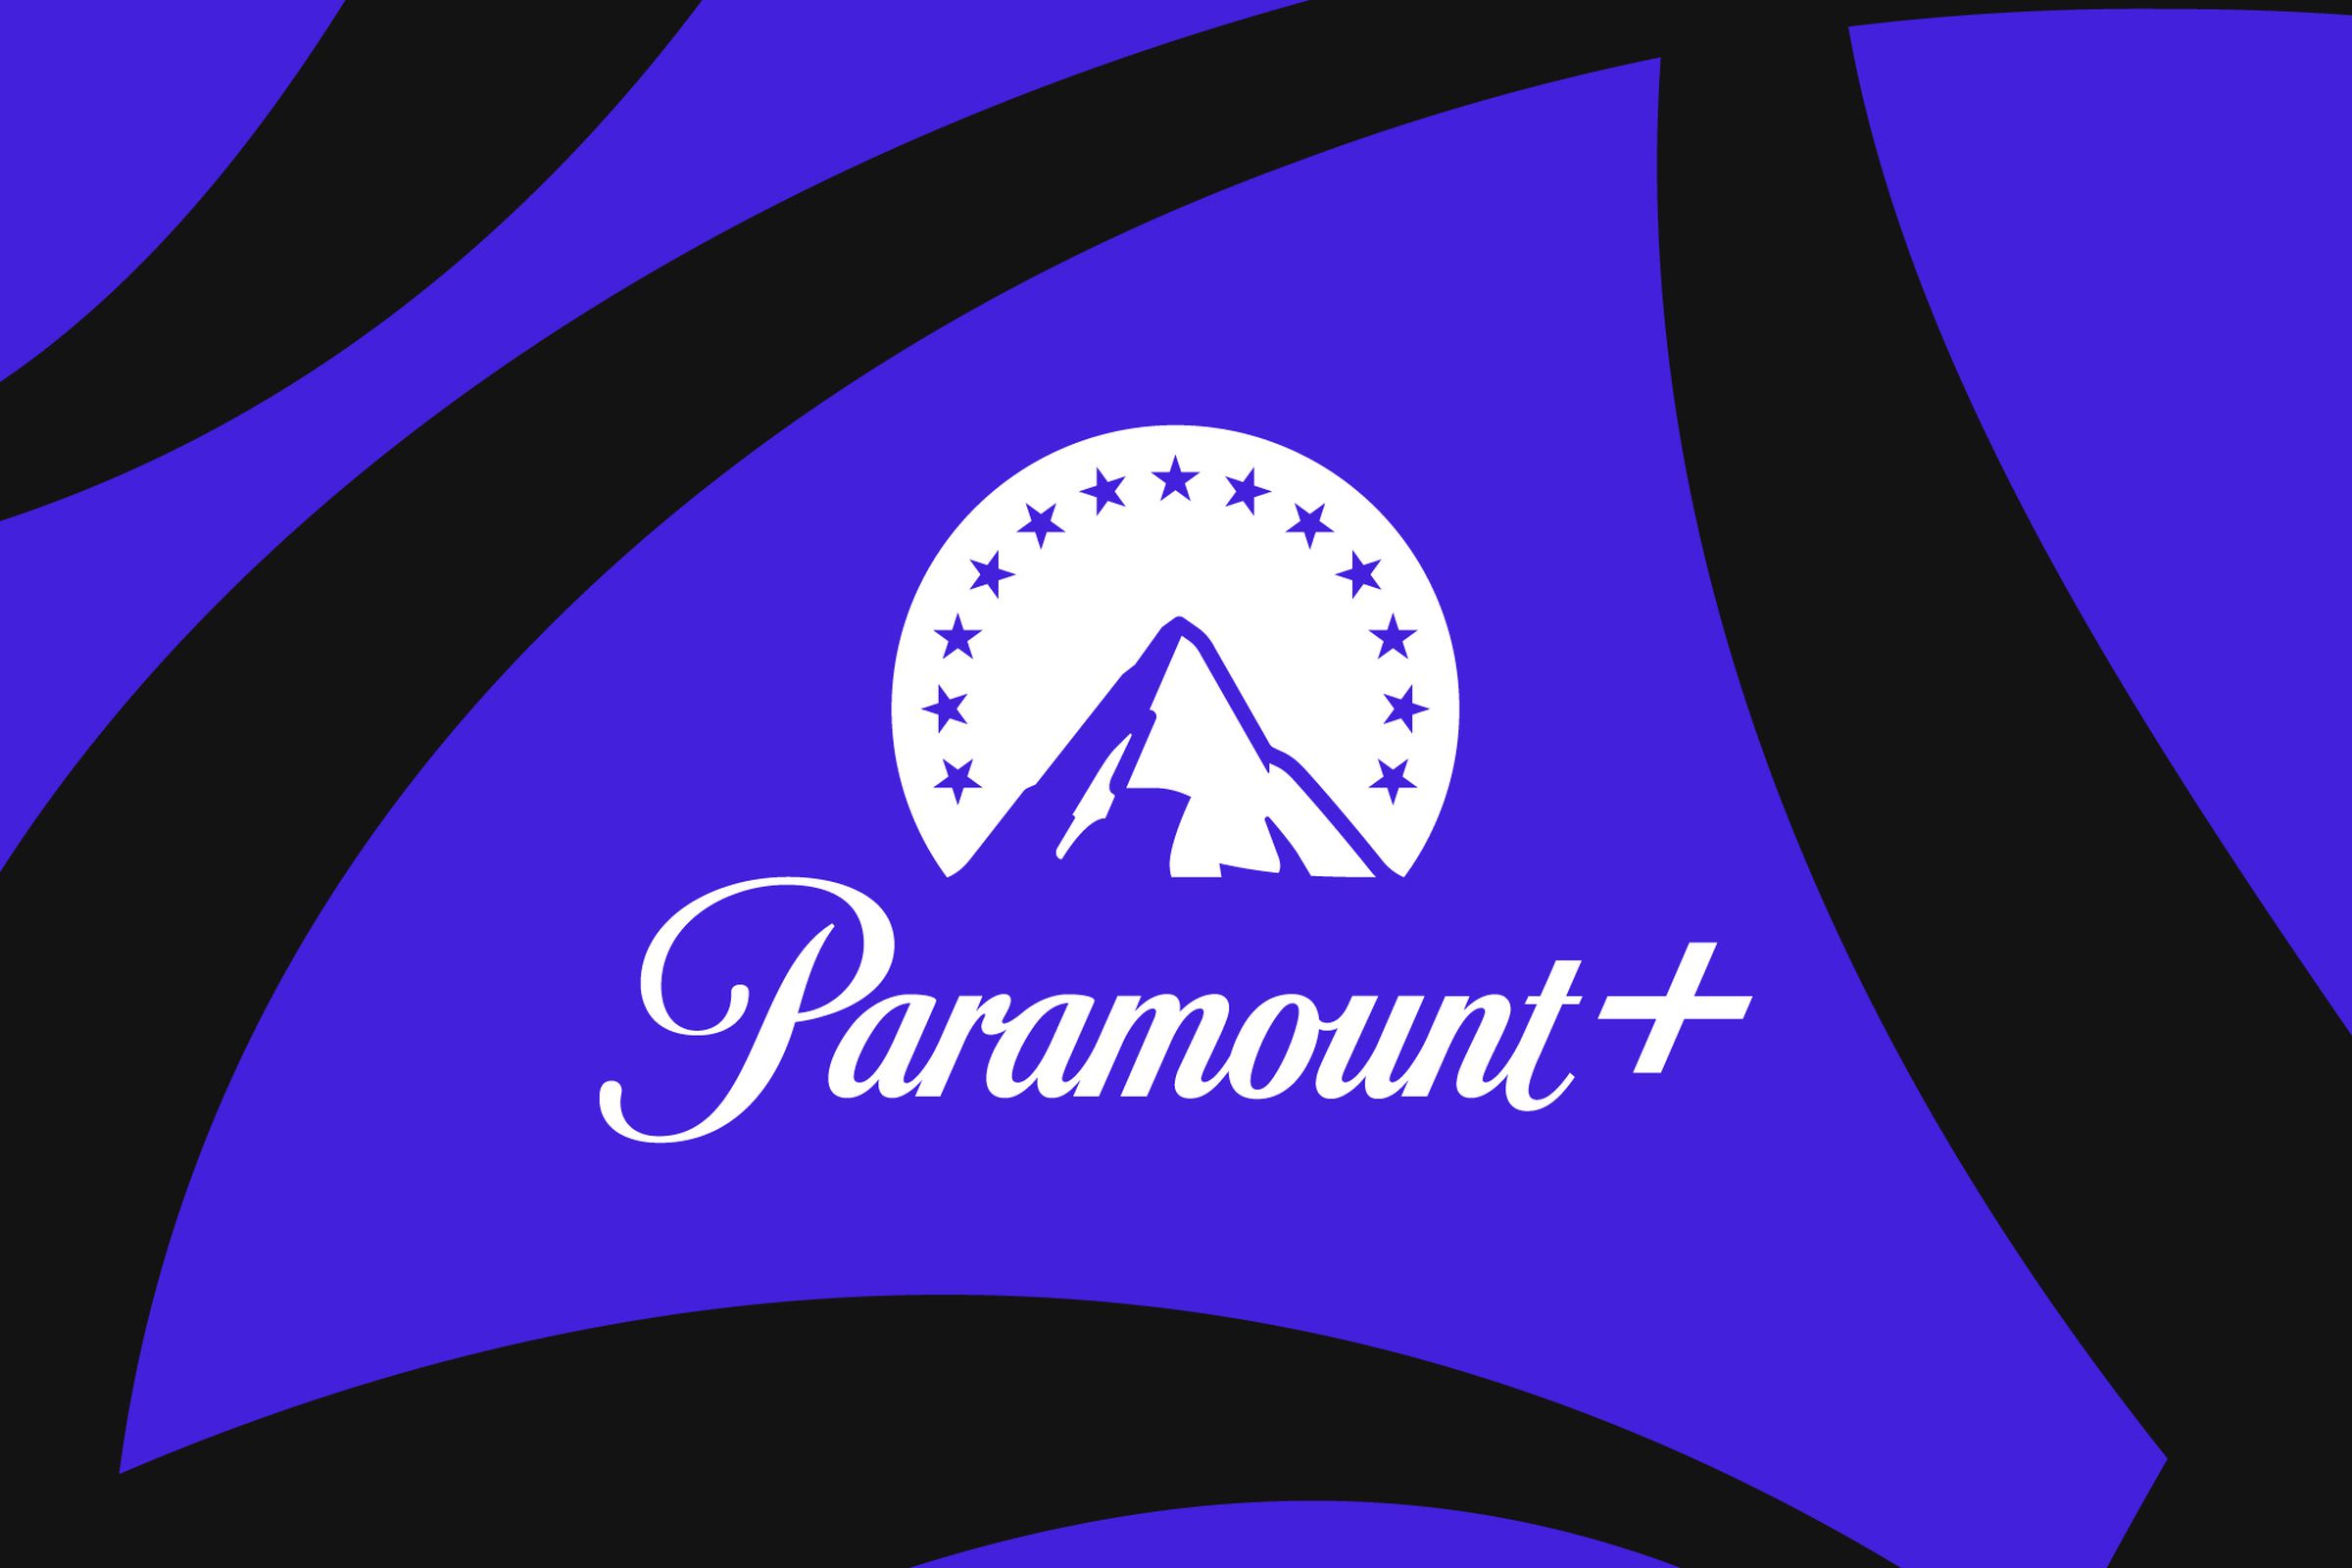 Paramount Plus logo on a blue and black background